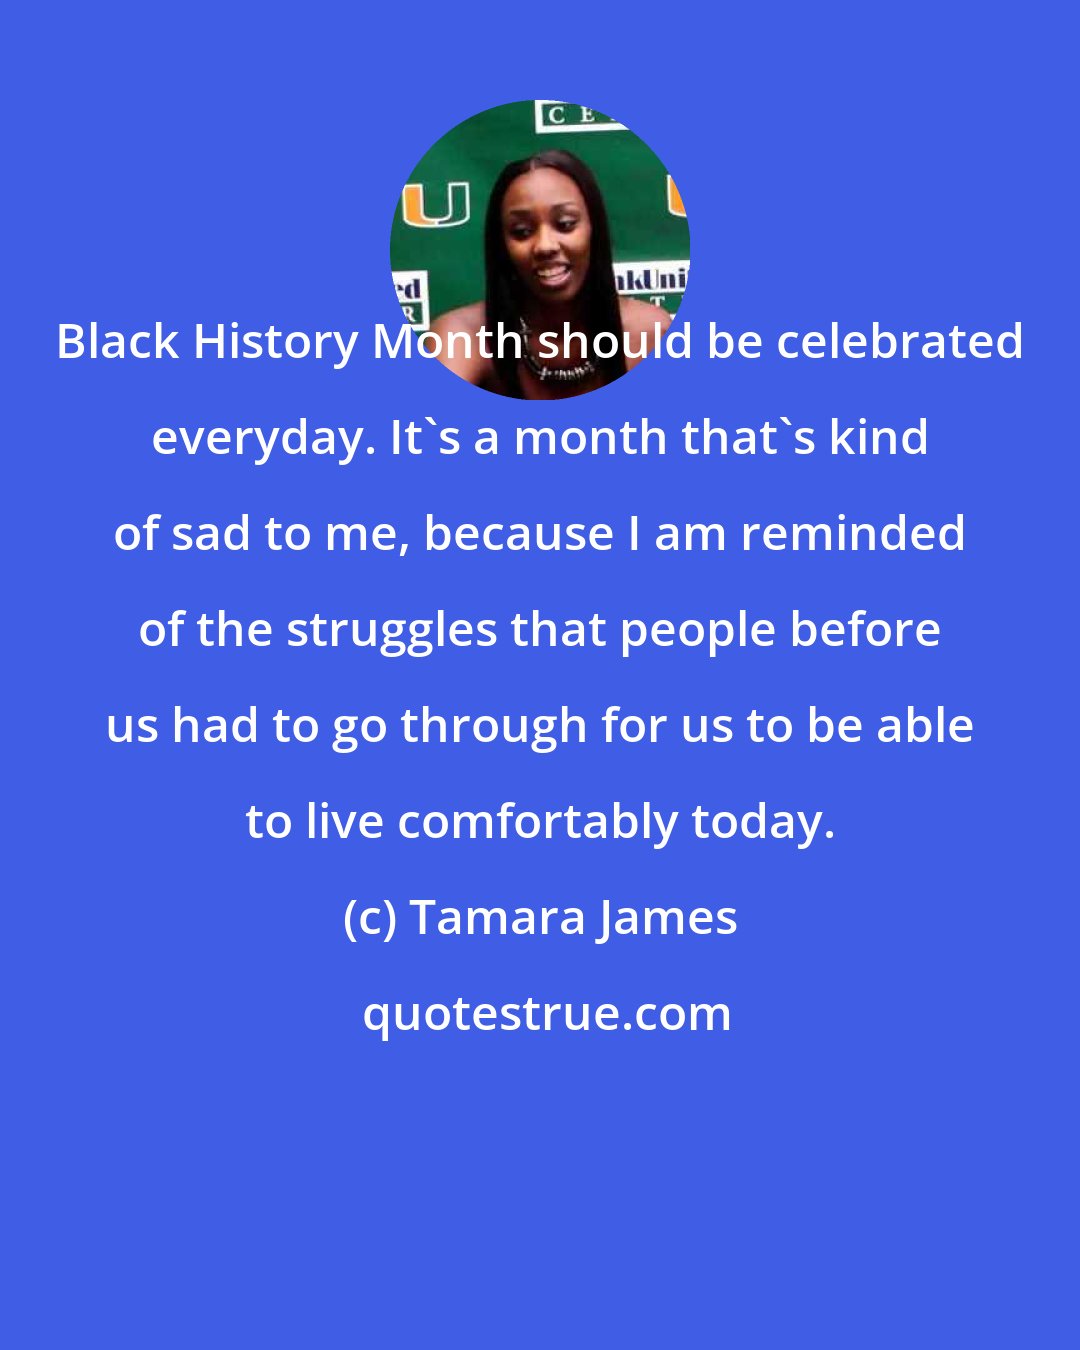 Tamara James: Black History Month should be celebrated everyday. It's a month that's kind of sad to me, because I am reminded of the struggles that people before us had to go through for us to be able to live comfortably today.